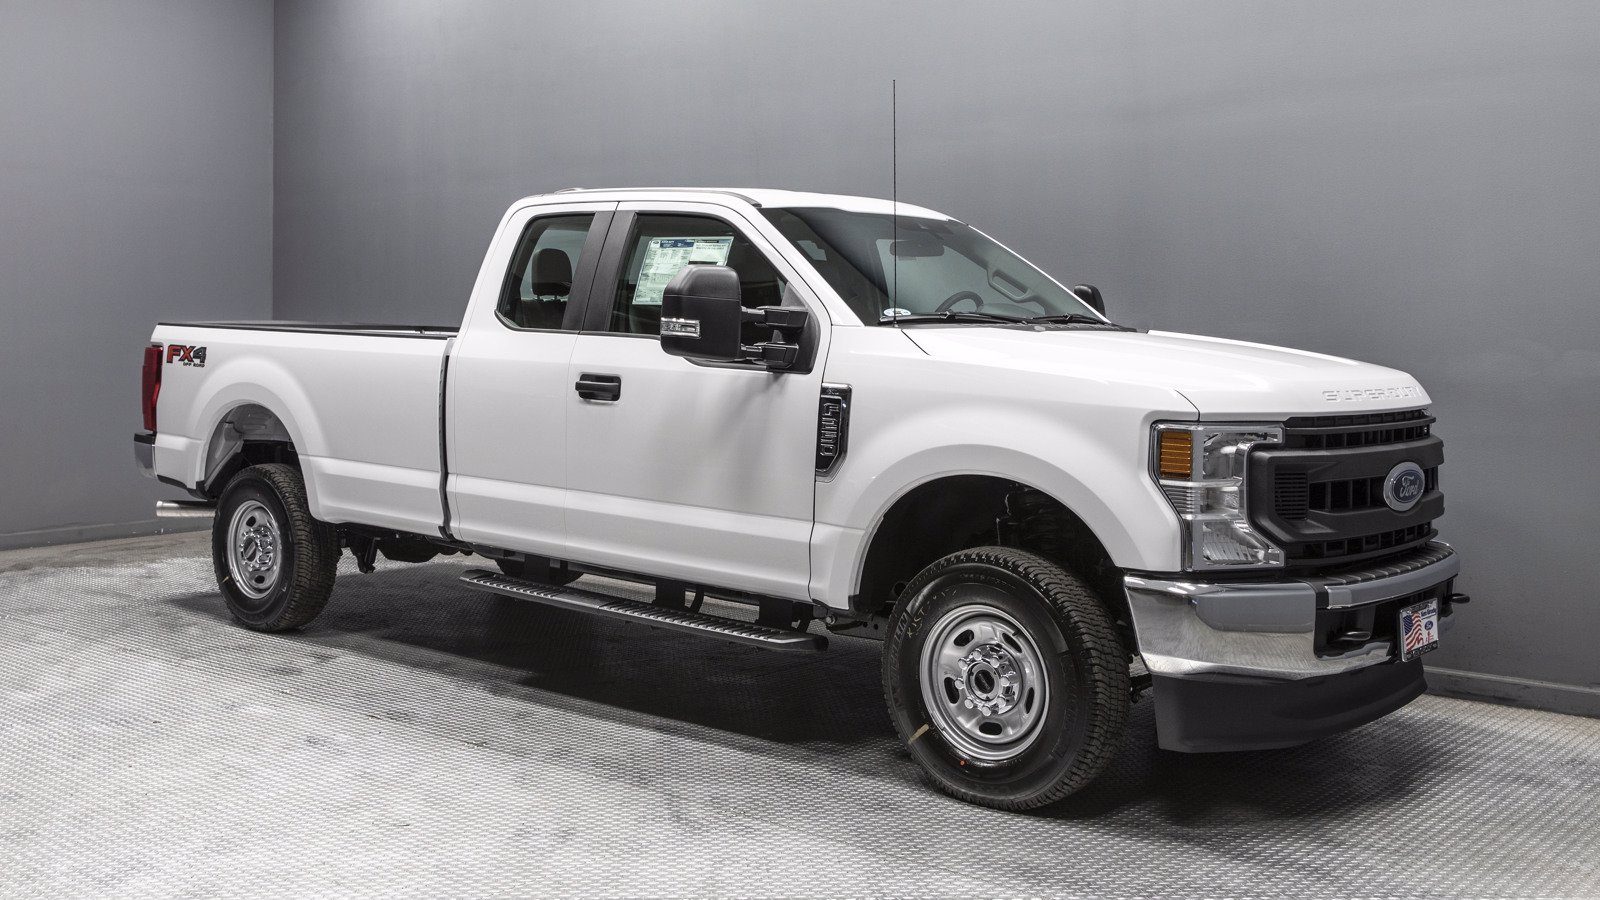 New 2020 Ford Super Duty F 250 Srw Xl Extended Cab Pickup In Redlands 03462 Ken Grody Ford Of 4258